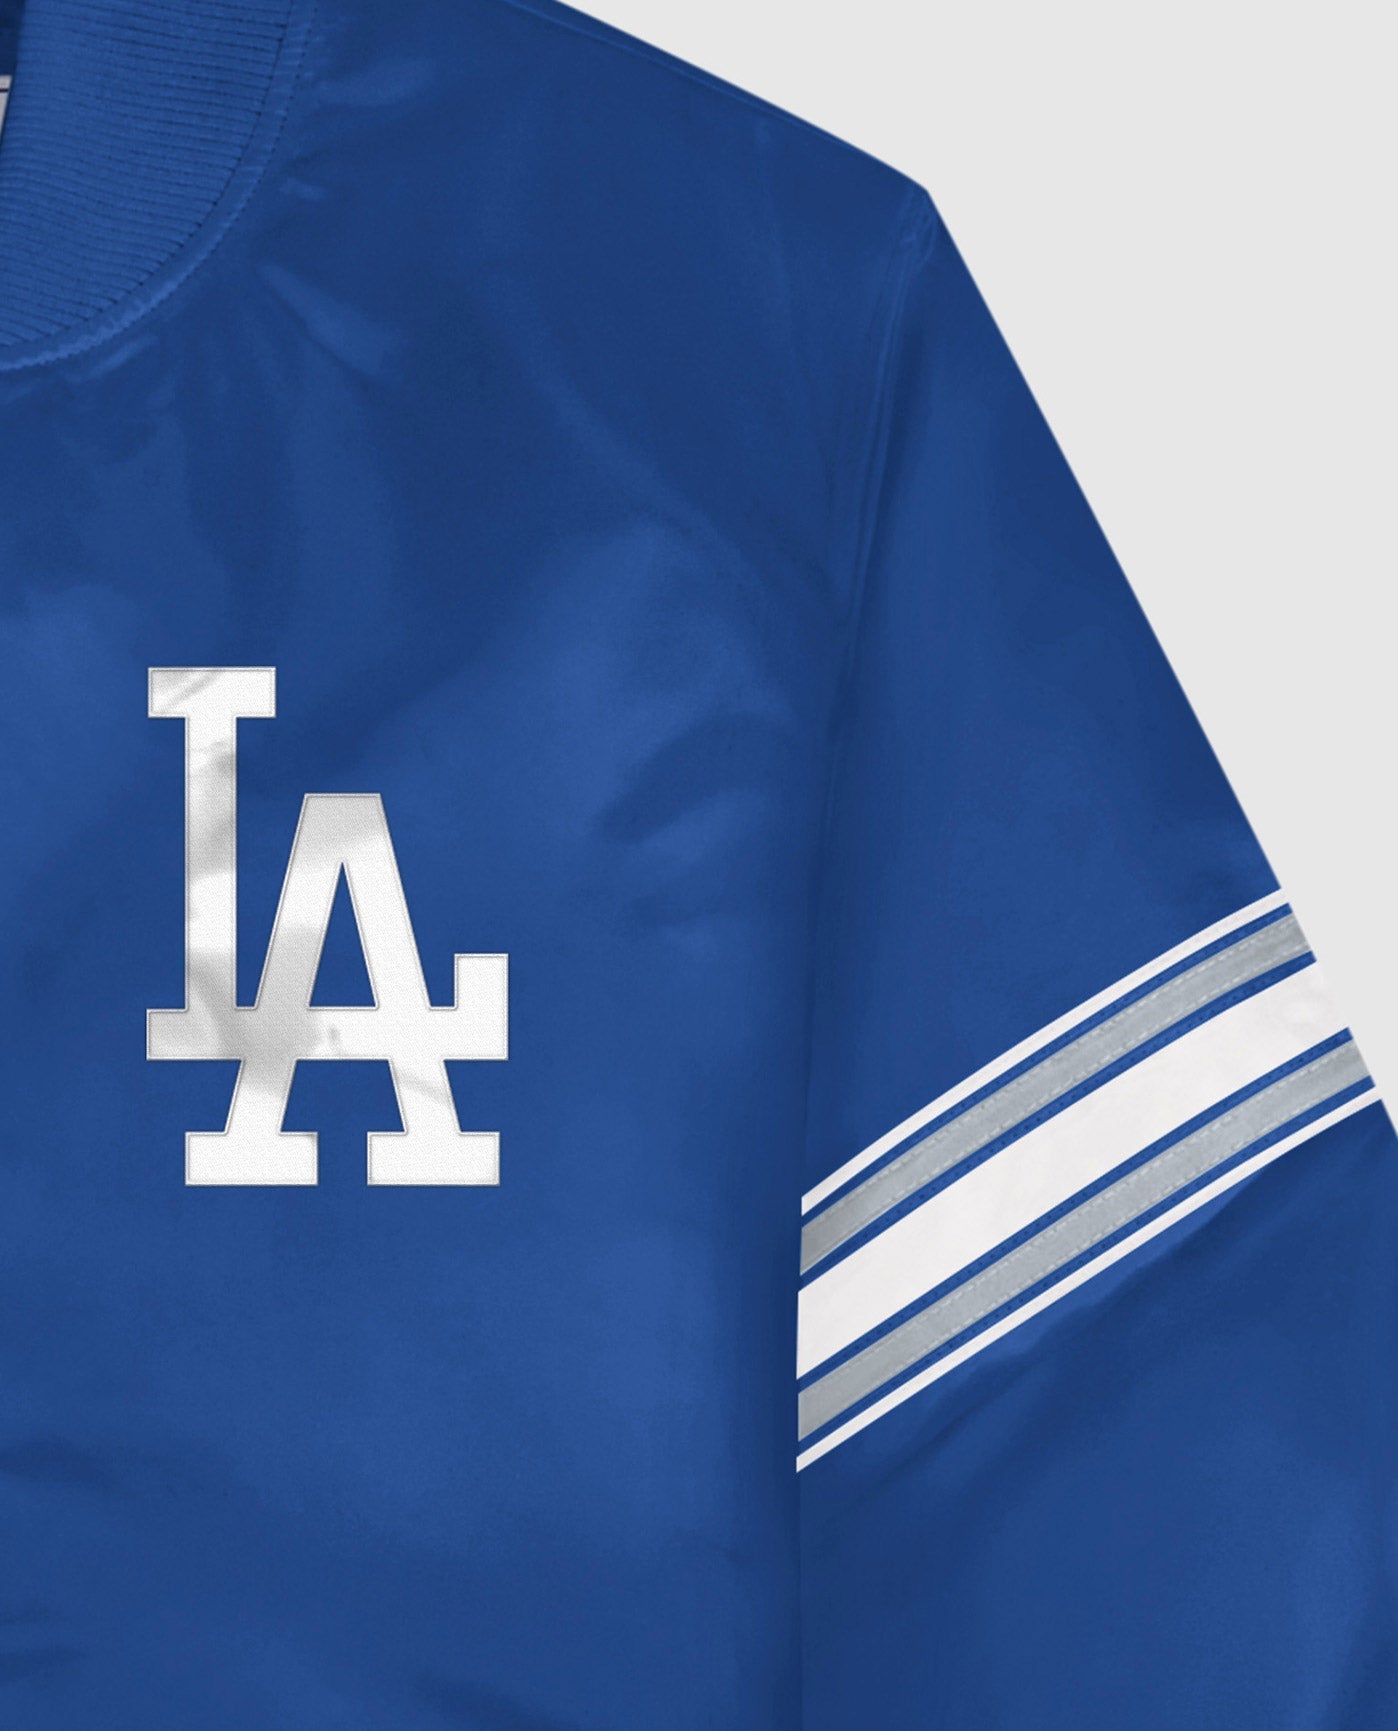 Los Angeles Dodgers Twill Applique Logo And Color Stripe Sleeve | Dodgers Blue